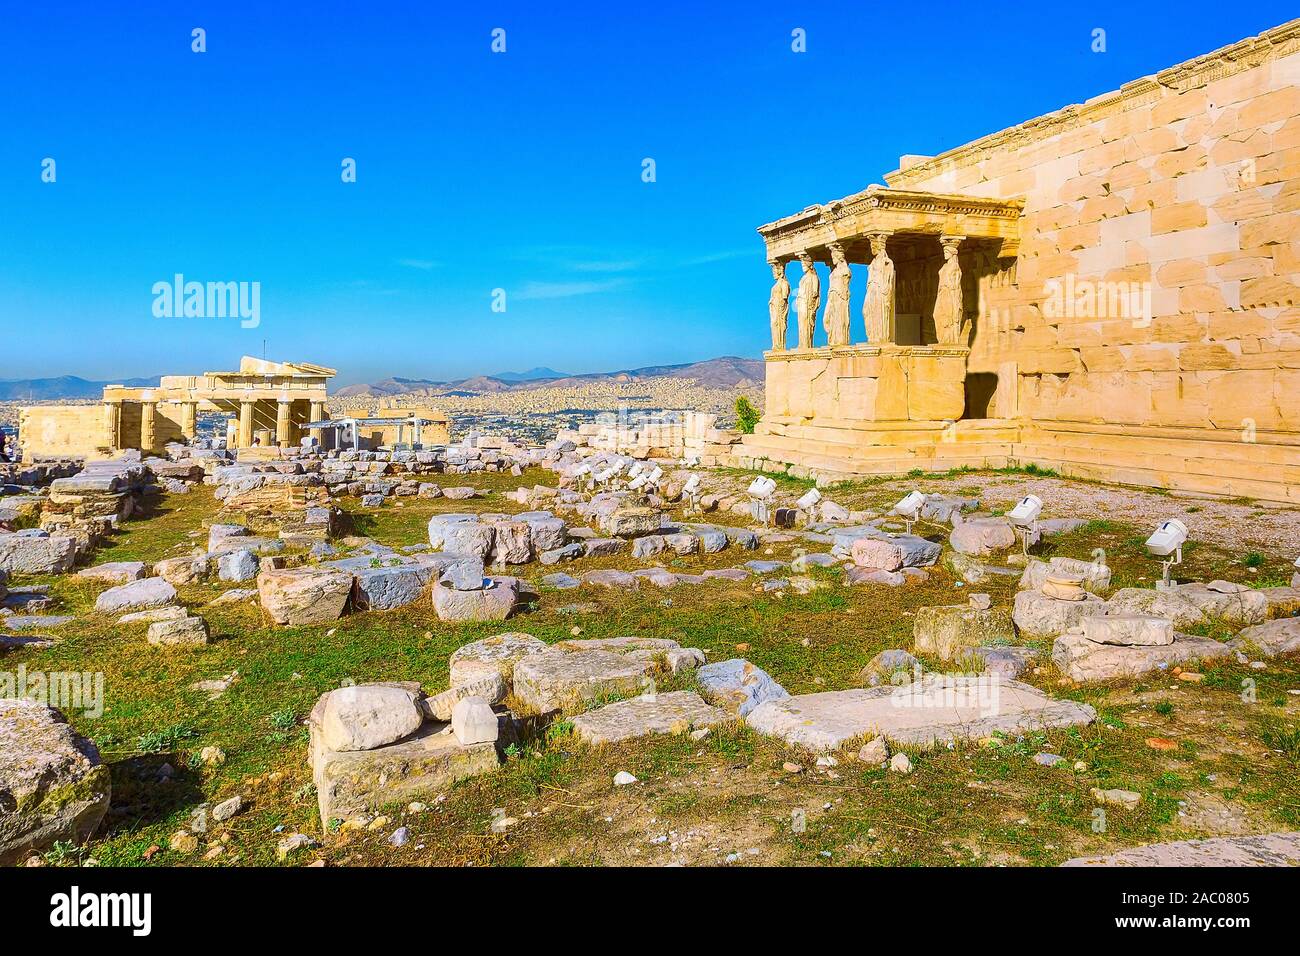 Acropolis, porch of caryatids, Erechtheum Temple in Athens, Greece and blue sky Stock Photo